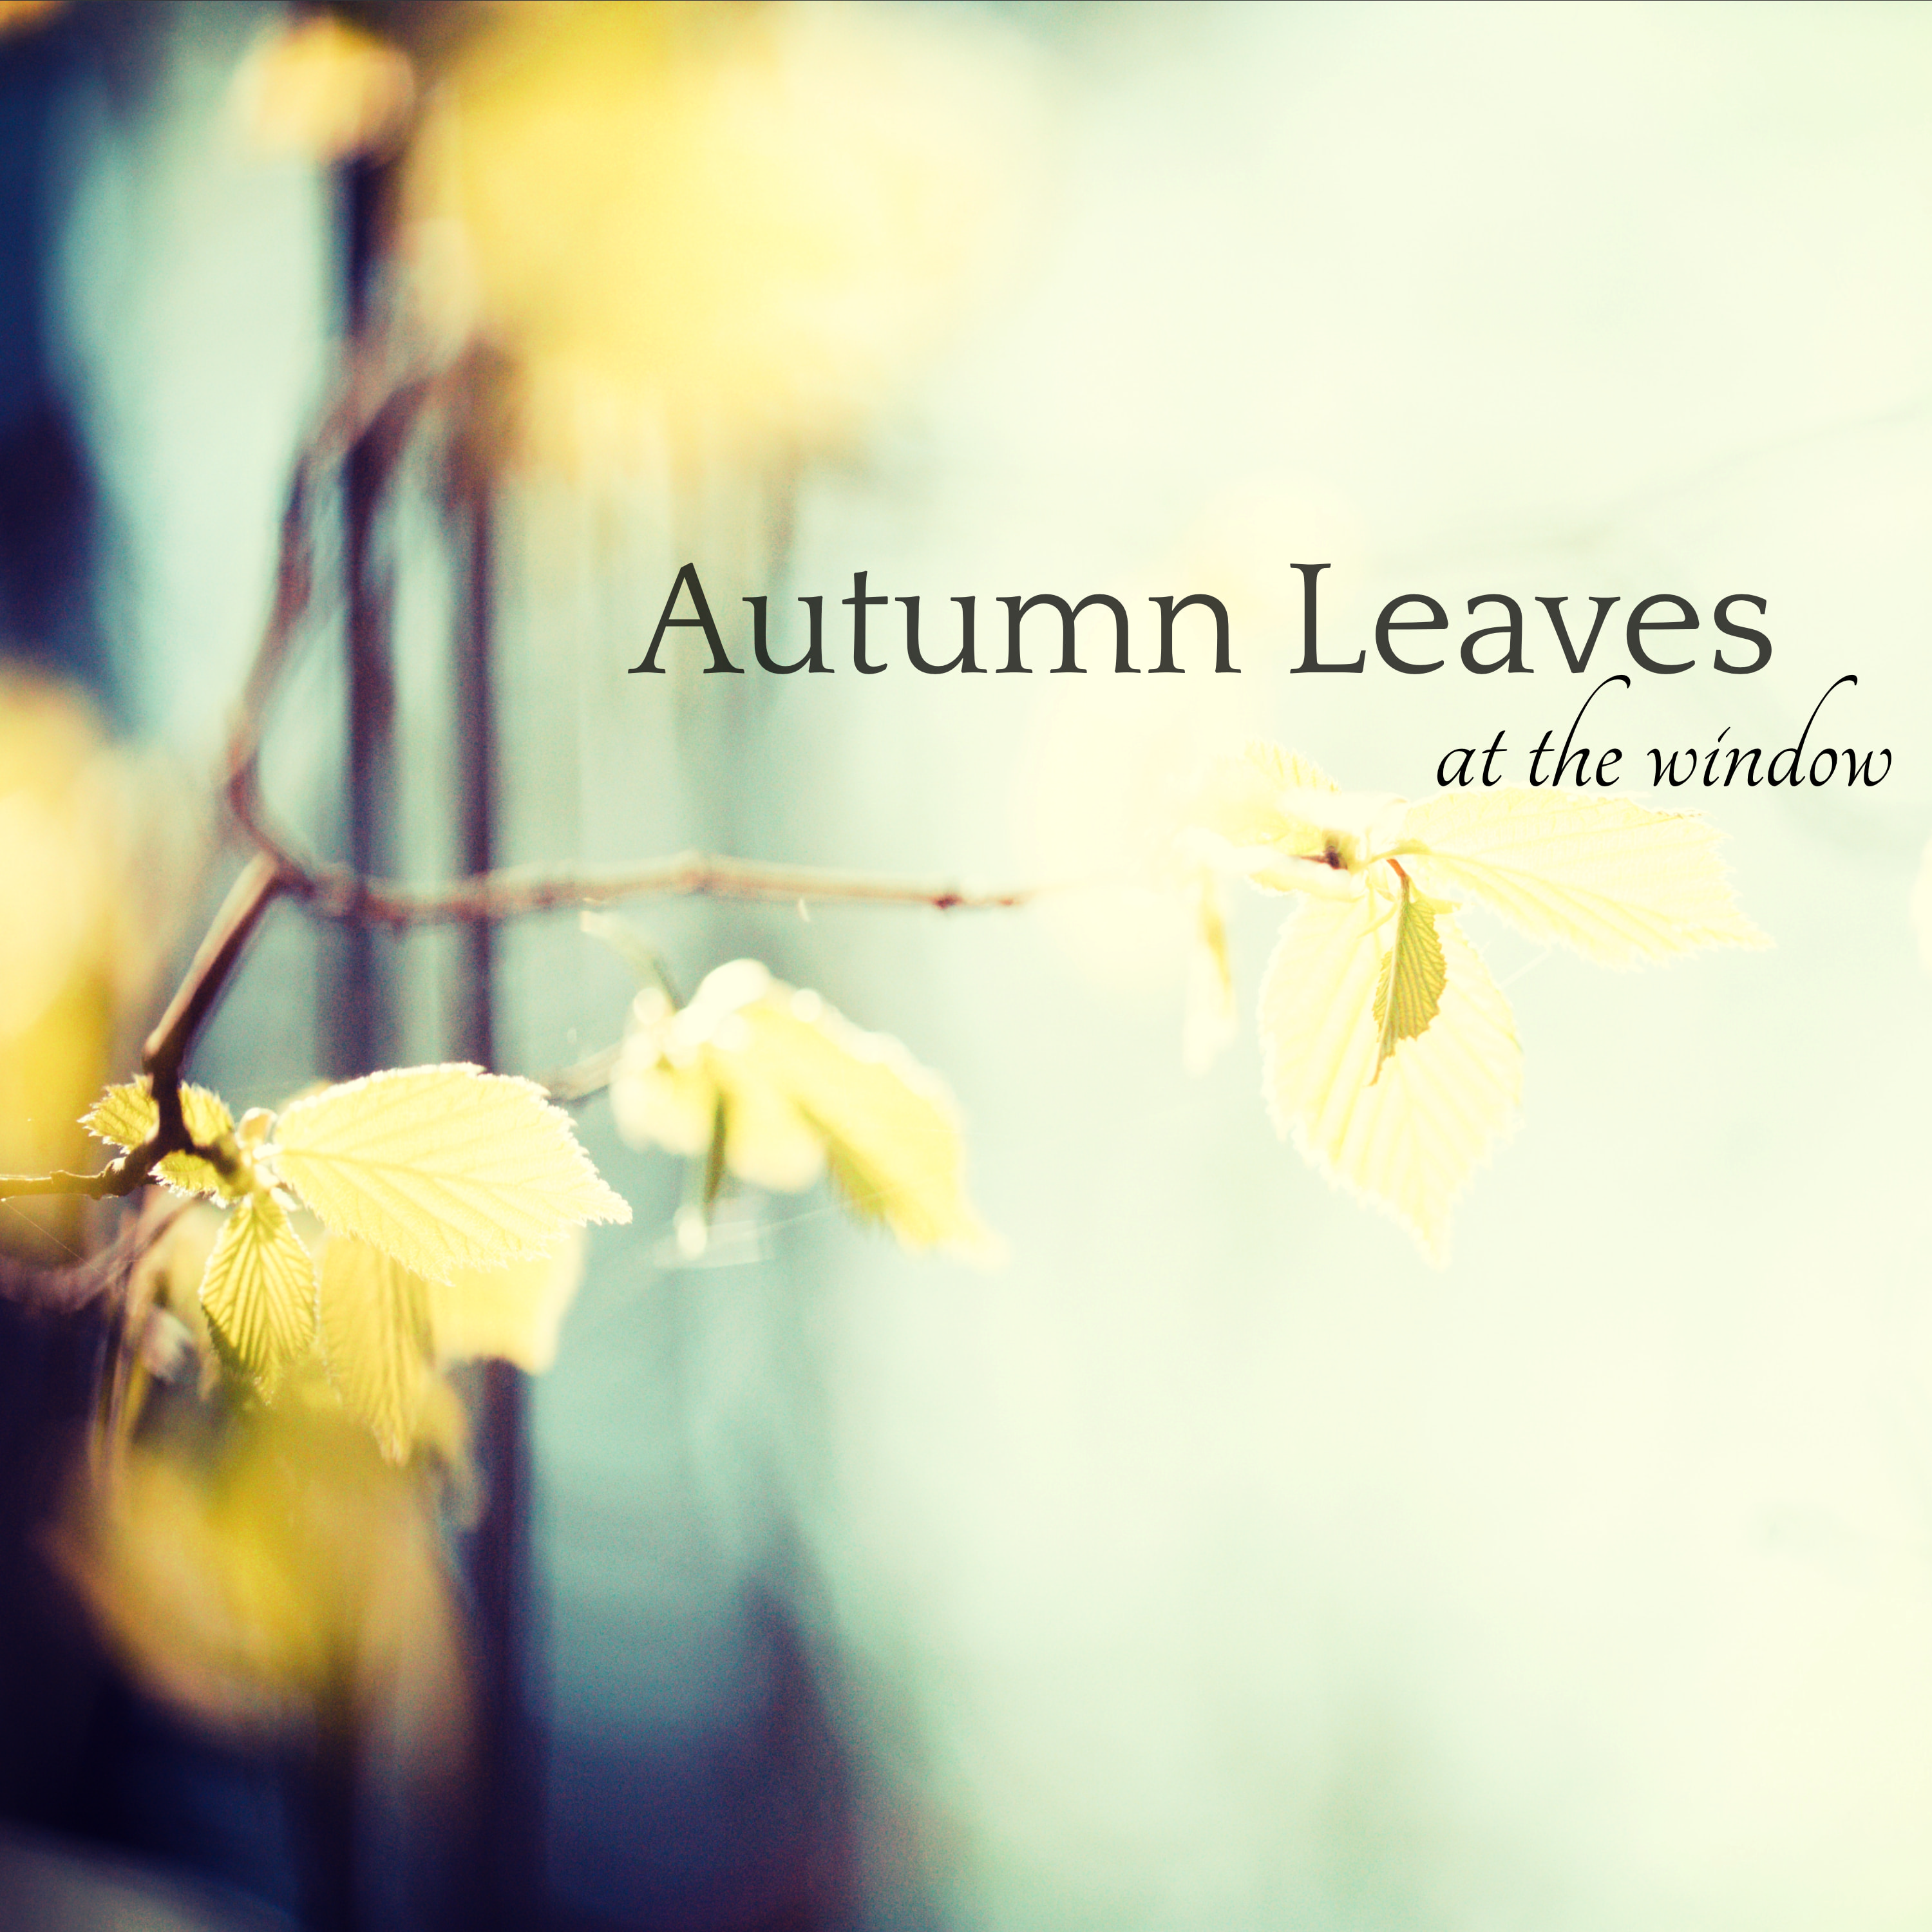 Autumn Leaves at the Window  Jazz  Piano Notes, Fall Leaves Romantic Autumn Mood Music